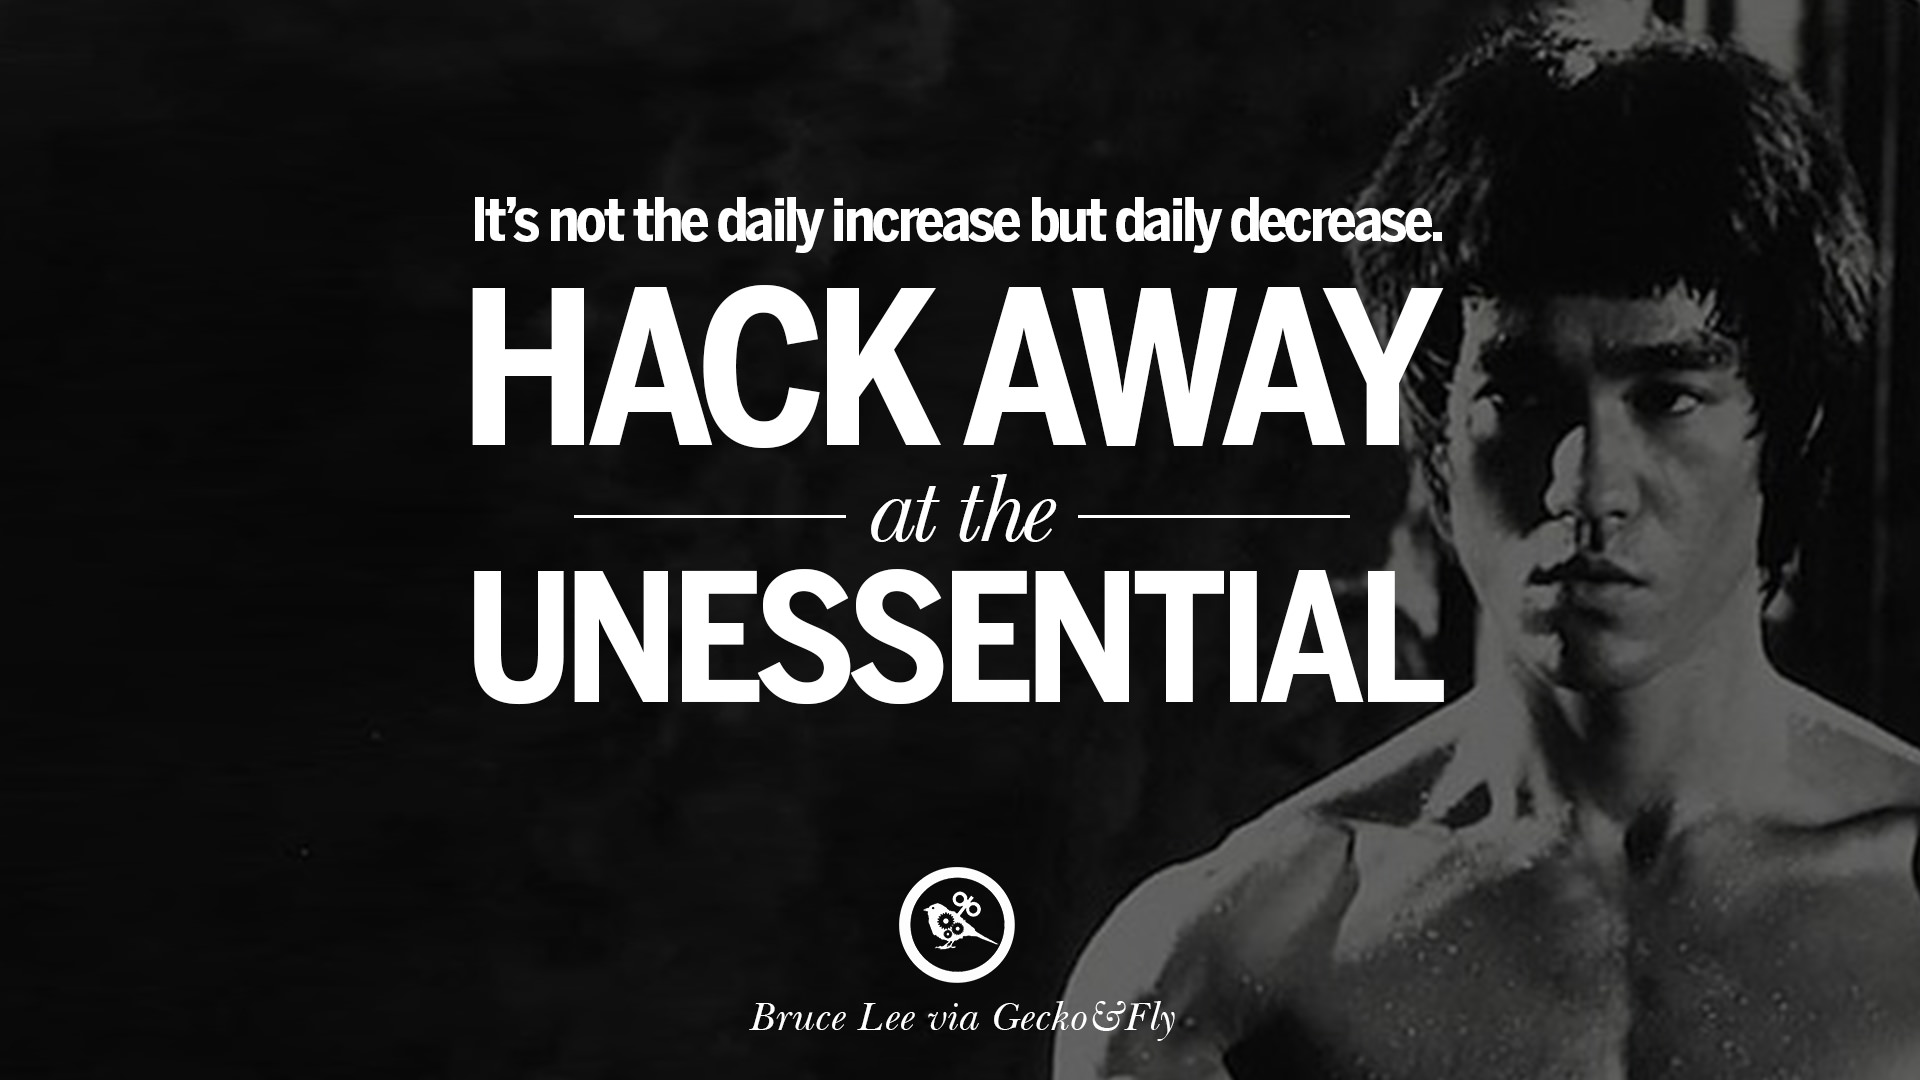 bruce-lee-kung-fu-quotes-23.jpg